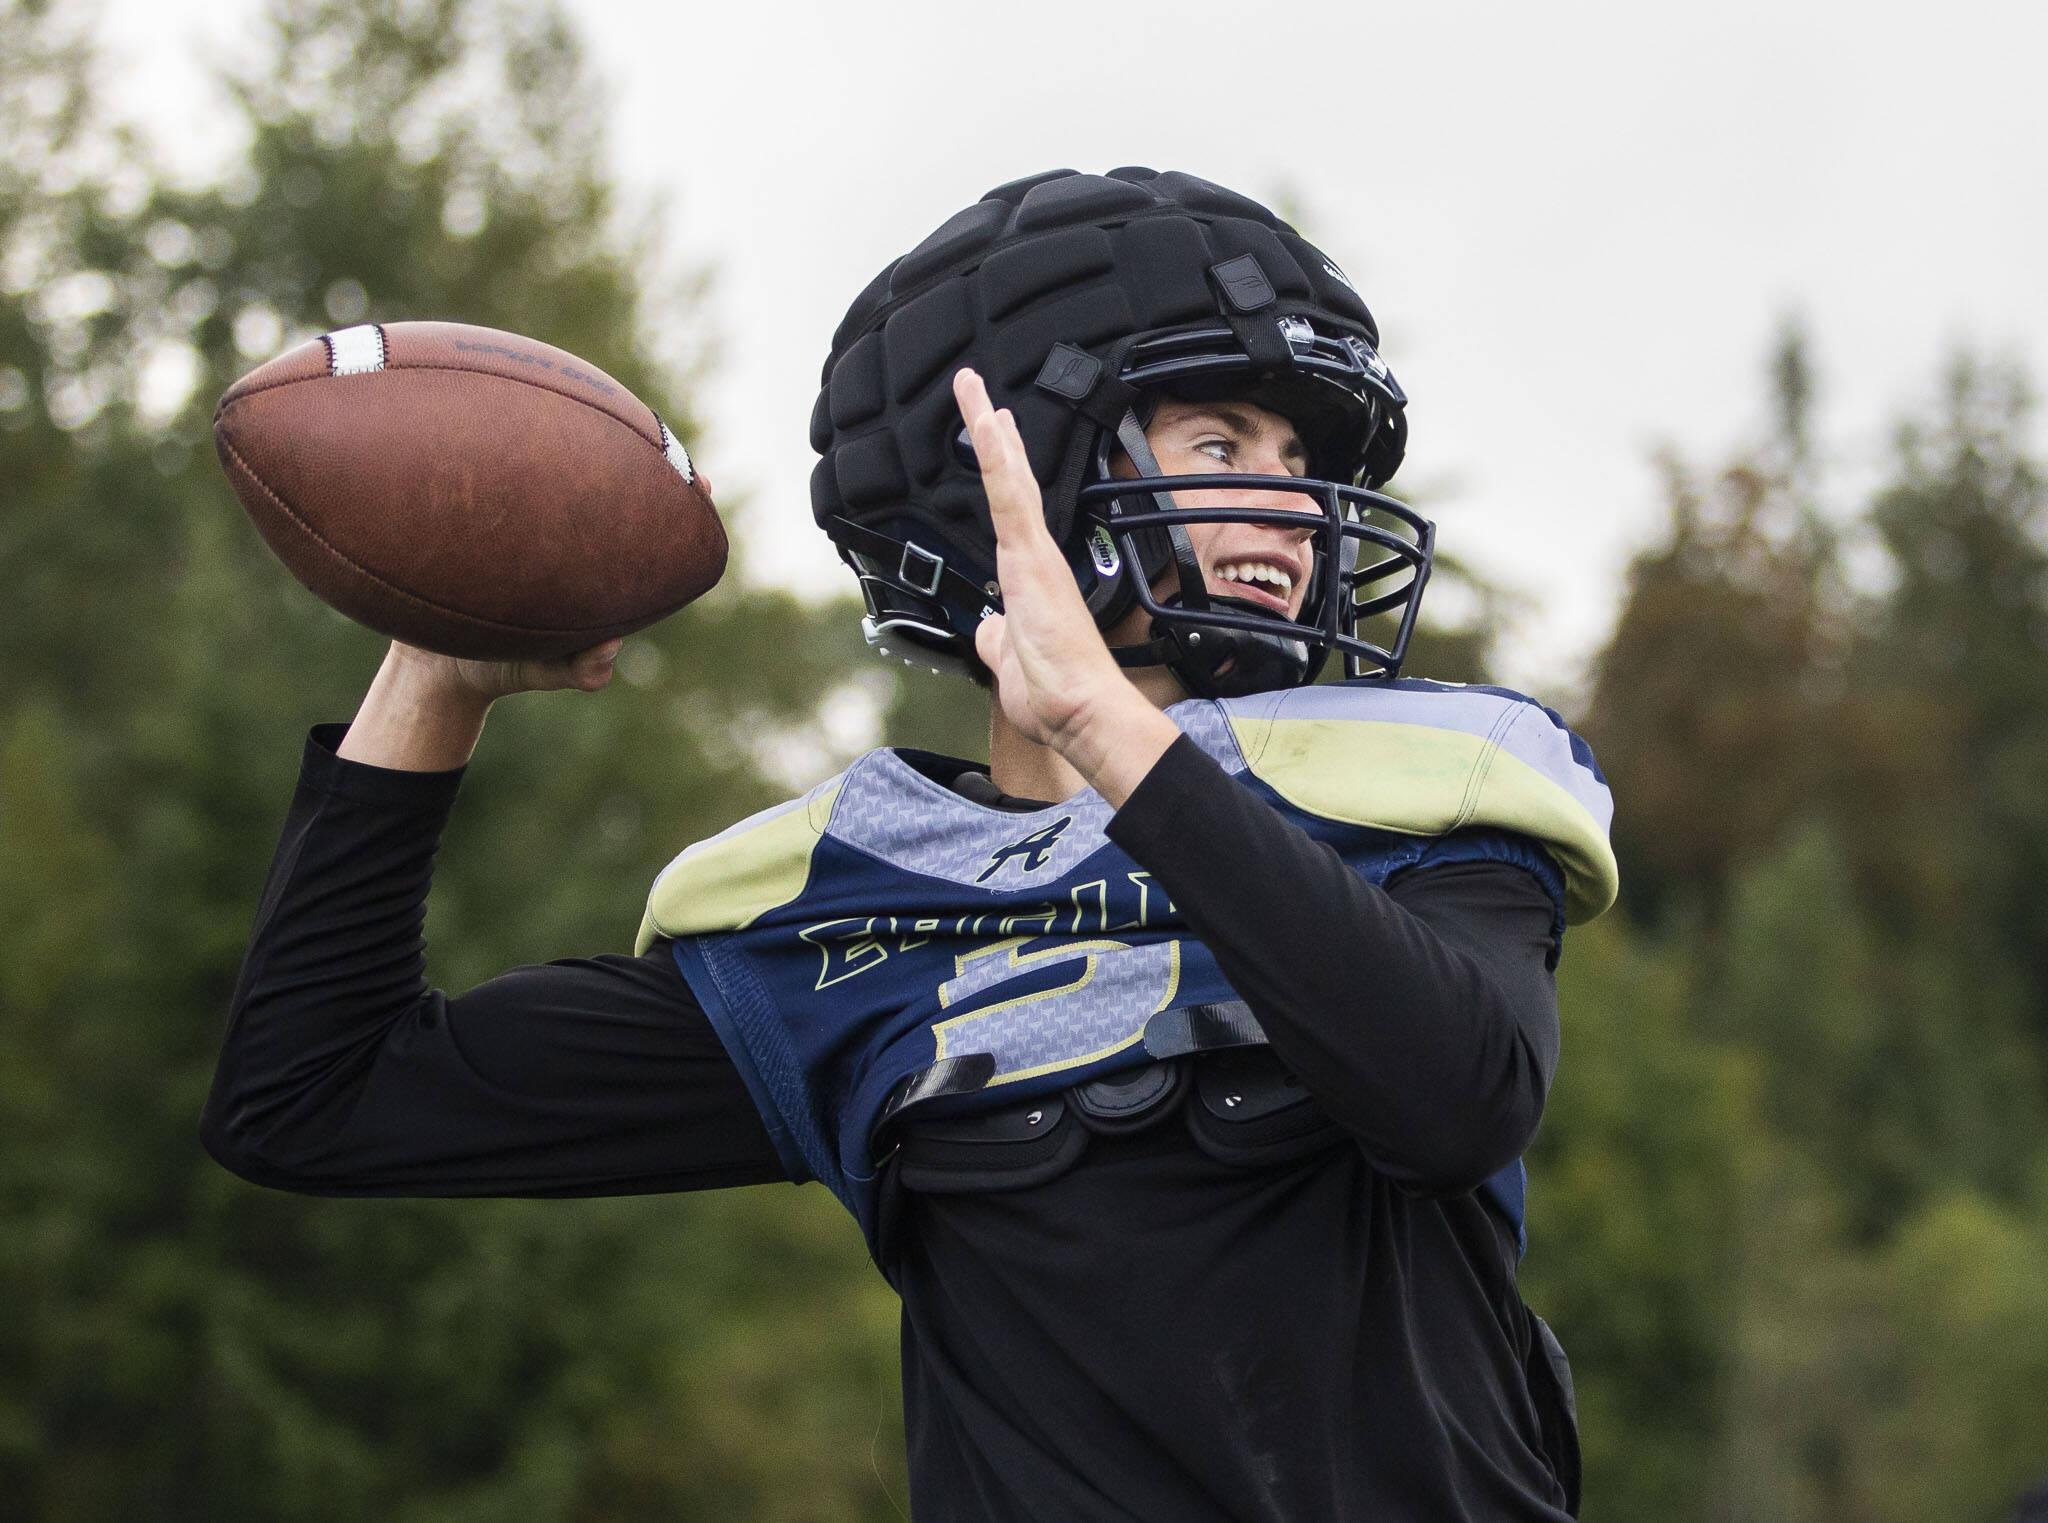 Jacoby Falor smiles while throwing the ball during practice on Wednesday at Arlington High School. (Olivia Vanni / The Herald)